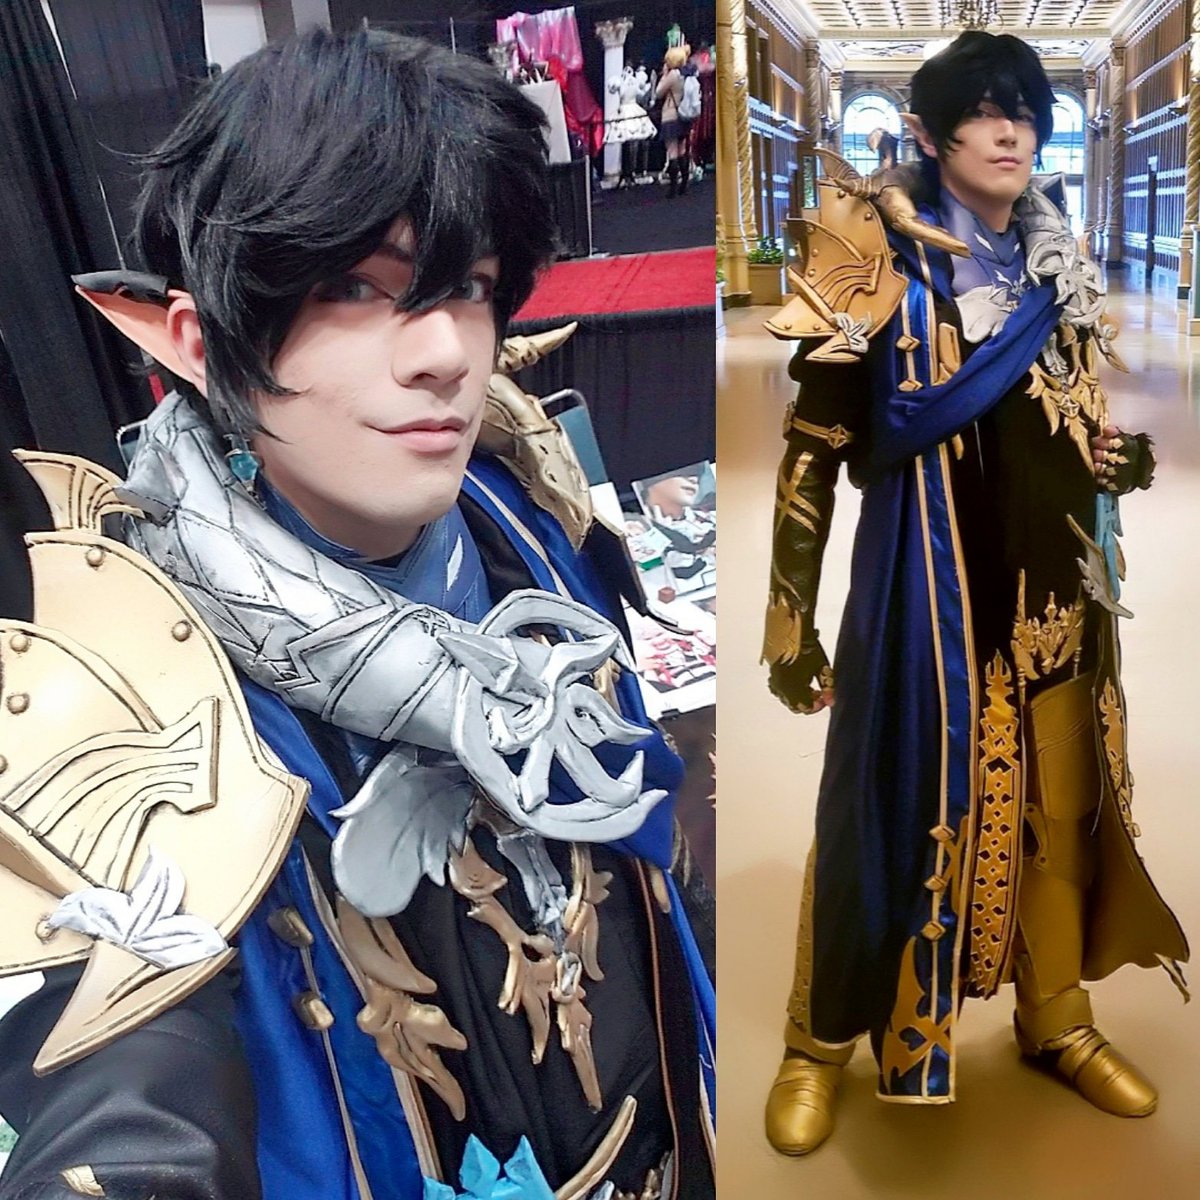 "Ser Aymeric of Ishgard"I am in Aymeric today at my booth in the ...